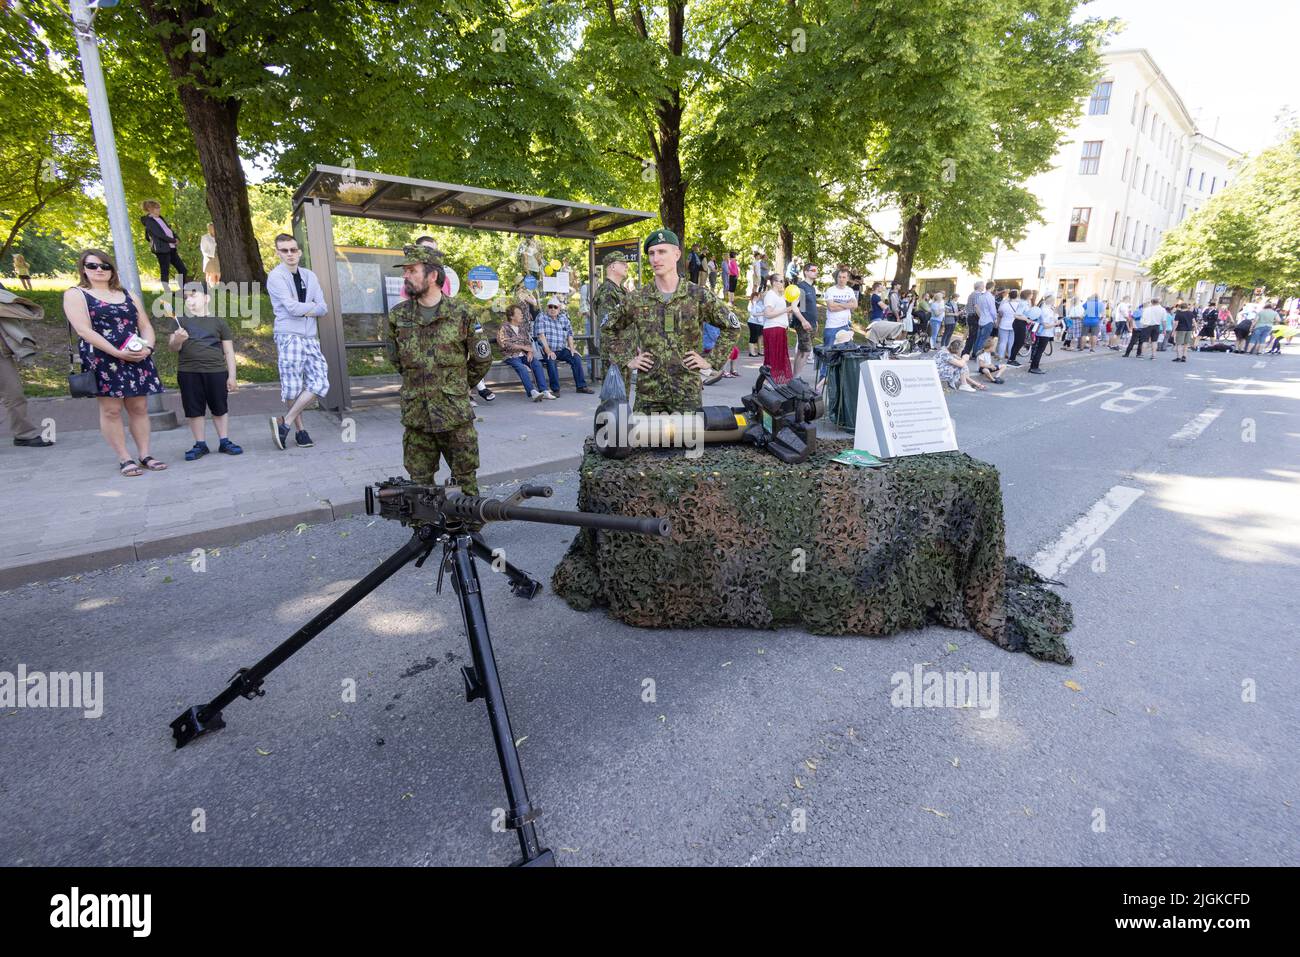 Soldiers of the Estonian Defence League paramilitary army display weapons on 23rd June, Victory Day, in Tartu, Estonia, Europe Stock Photo